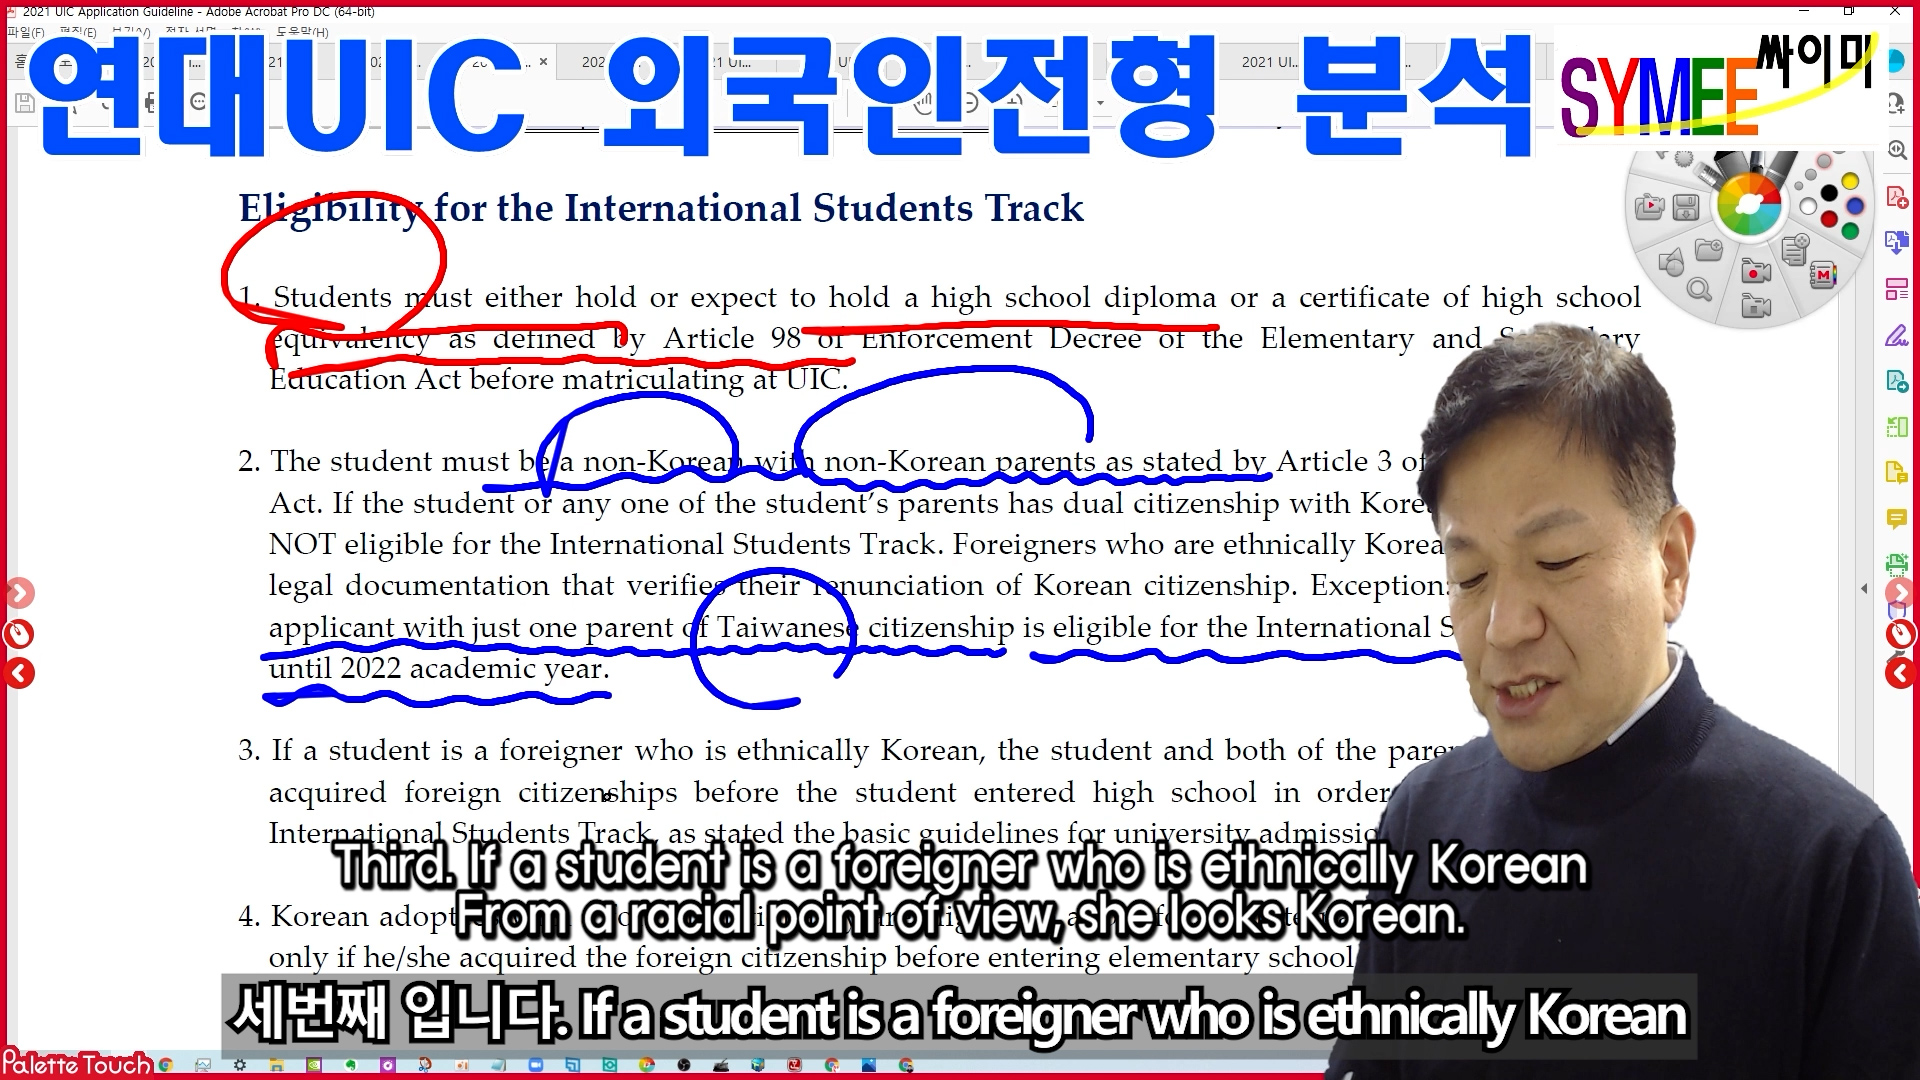 Yonsei Univ. Admission for UIC for Foreign Student 02 Qualifications.00_05_06_45.스틸 010.jpg